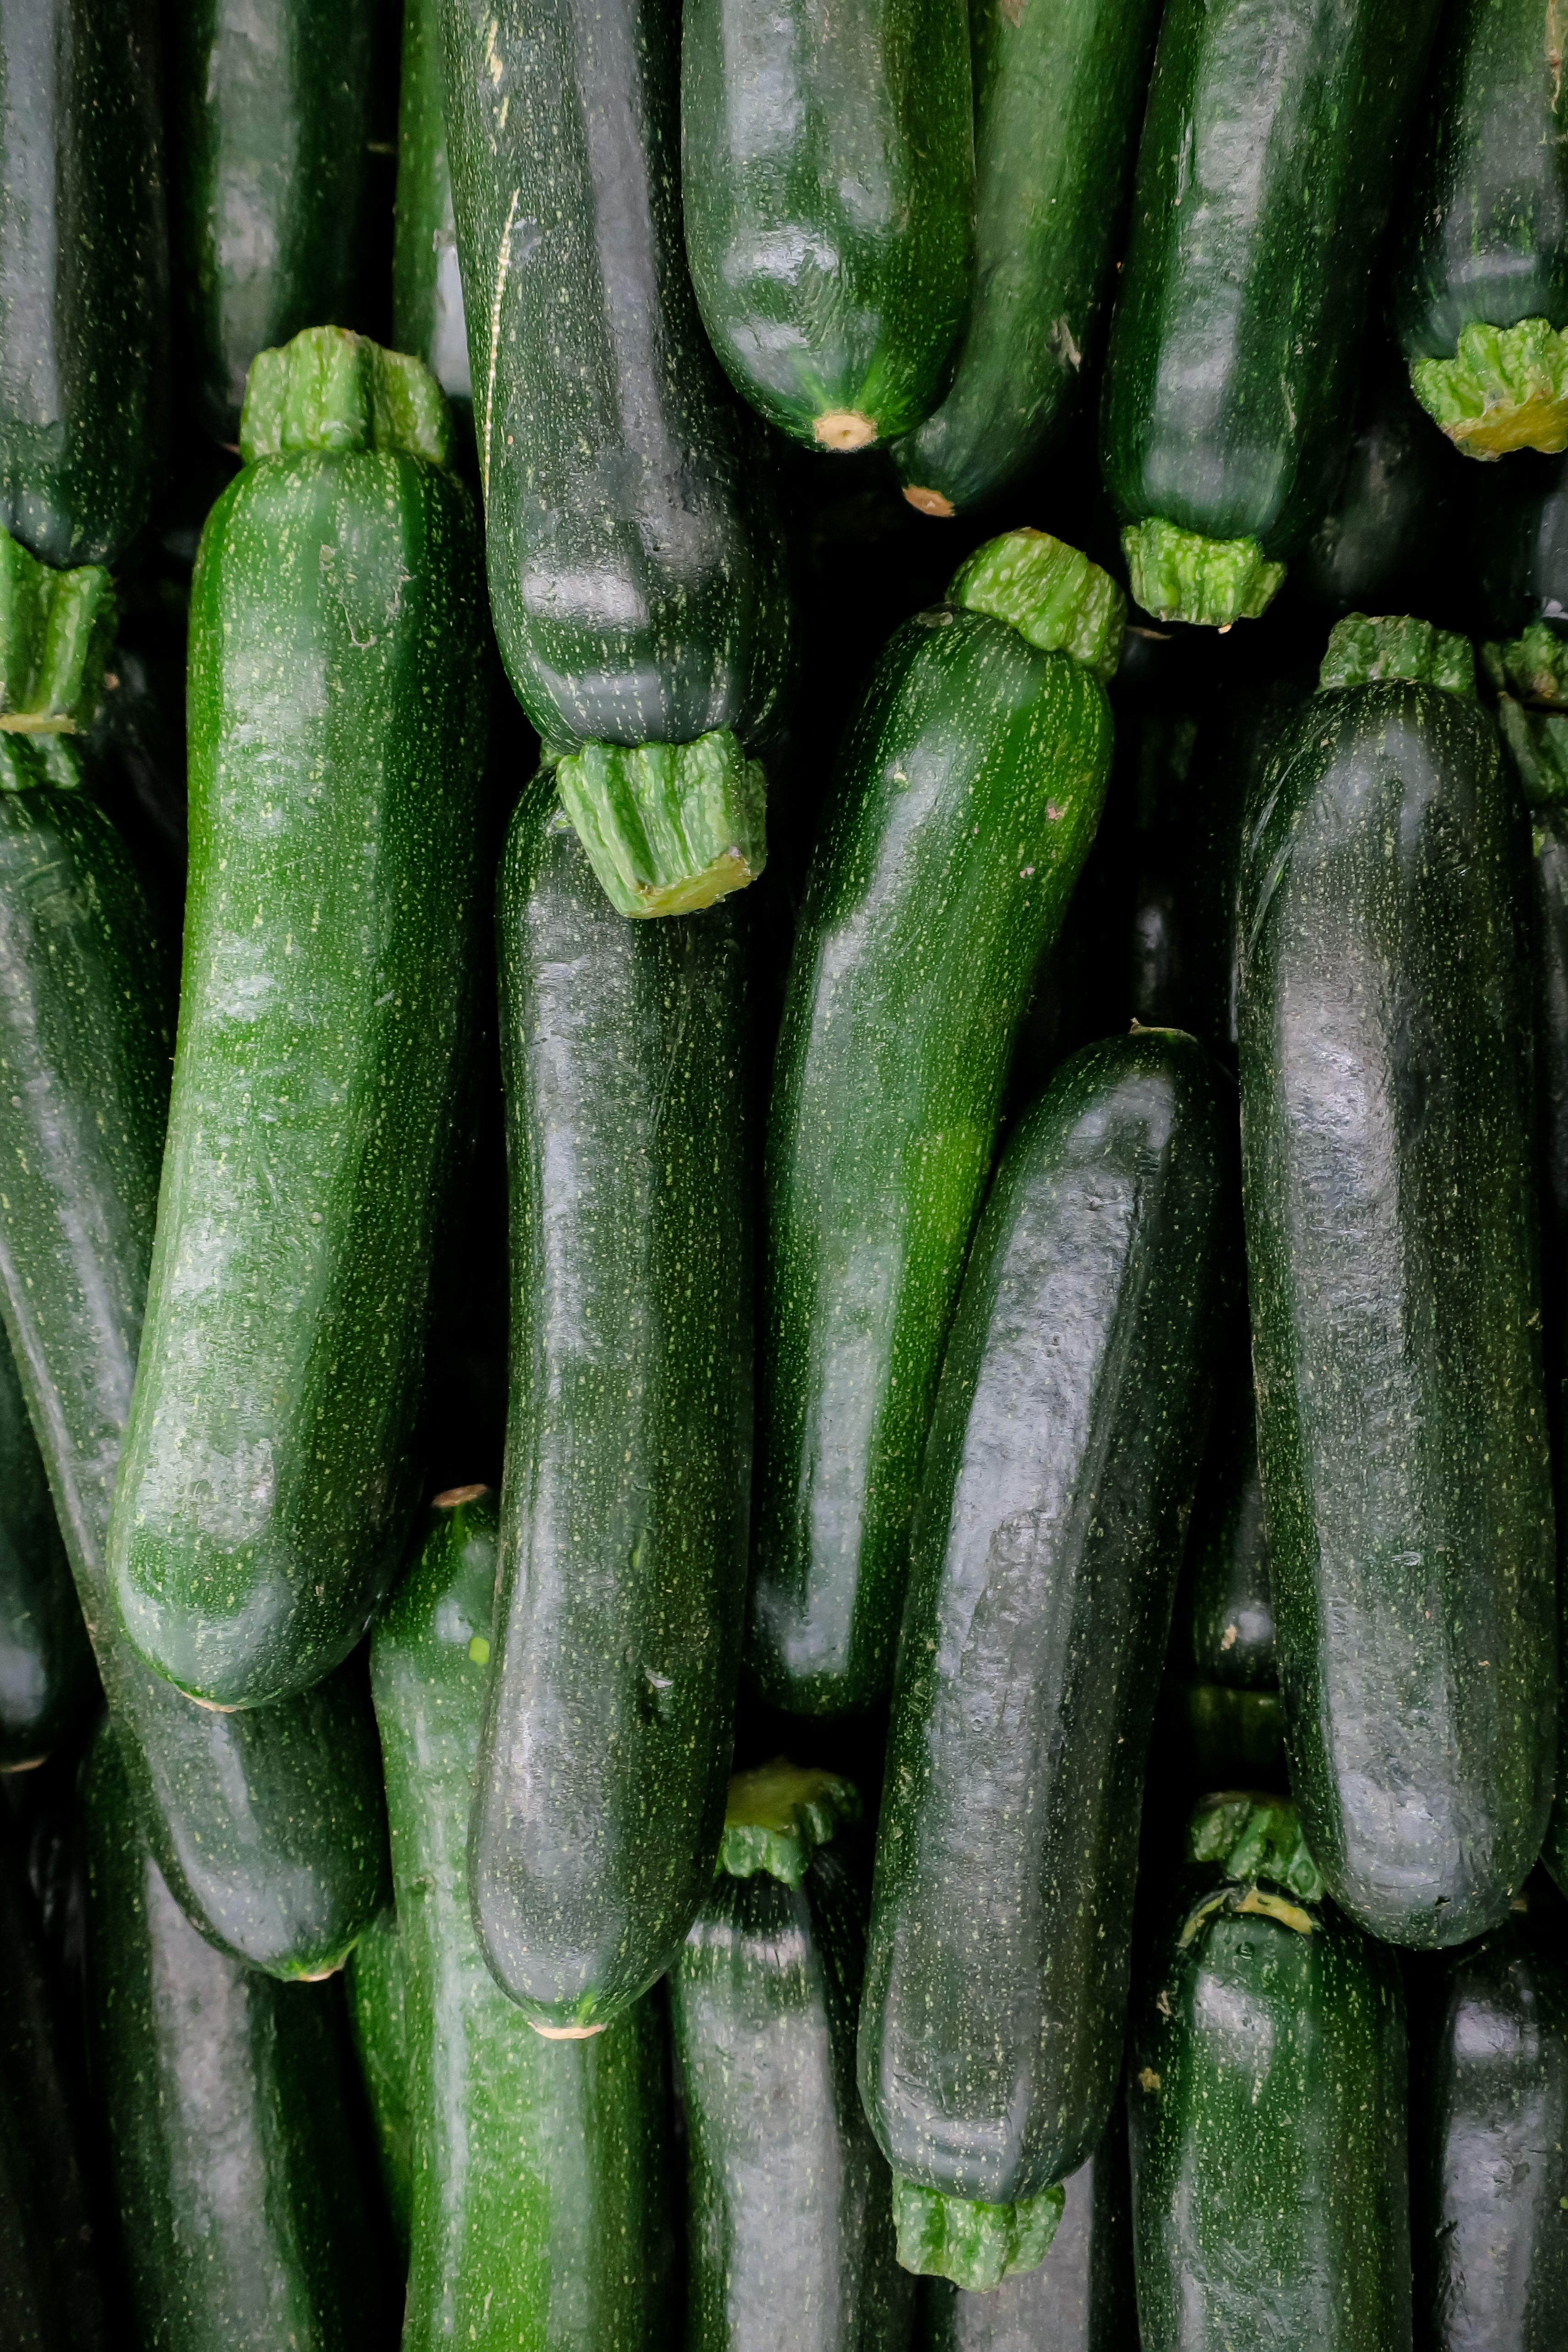 A bunch of dark green zucchini piled on top of each other